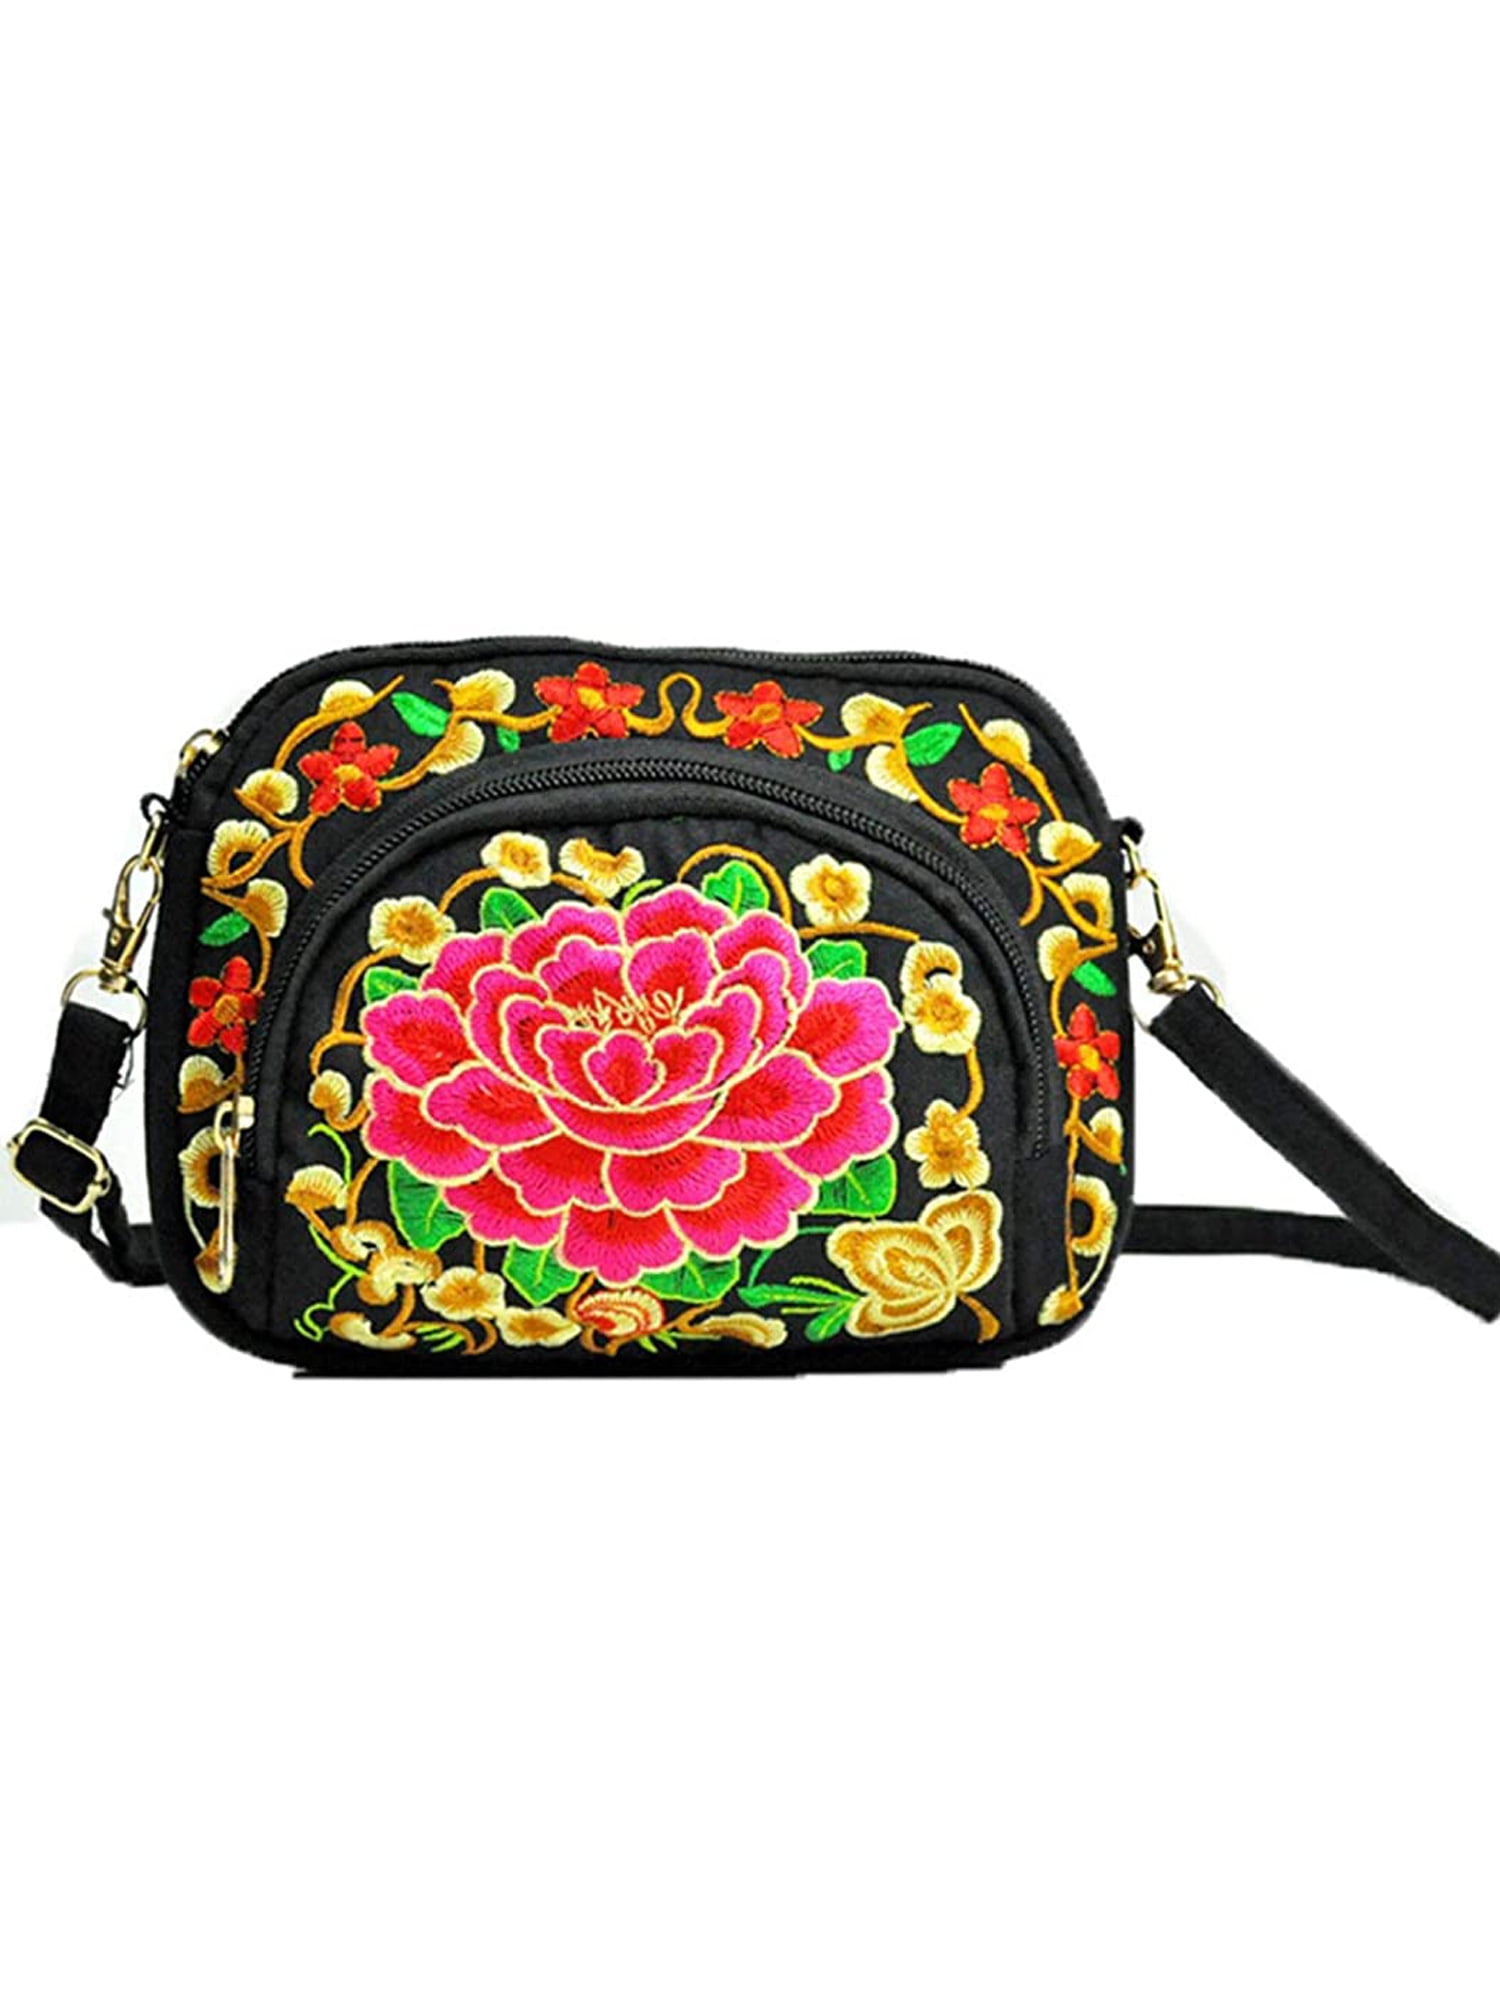 Hmong Flower Crossbody Bag for Women with Colorful Hairs Embroidered Sling Bag 